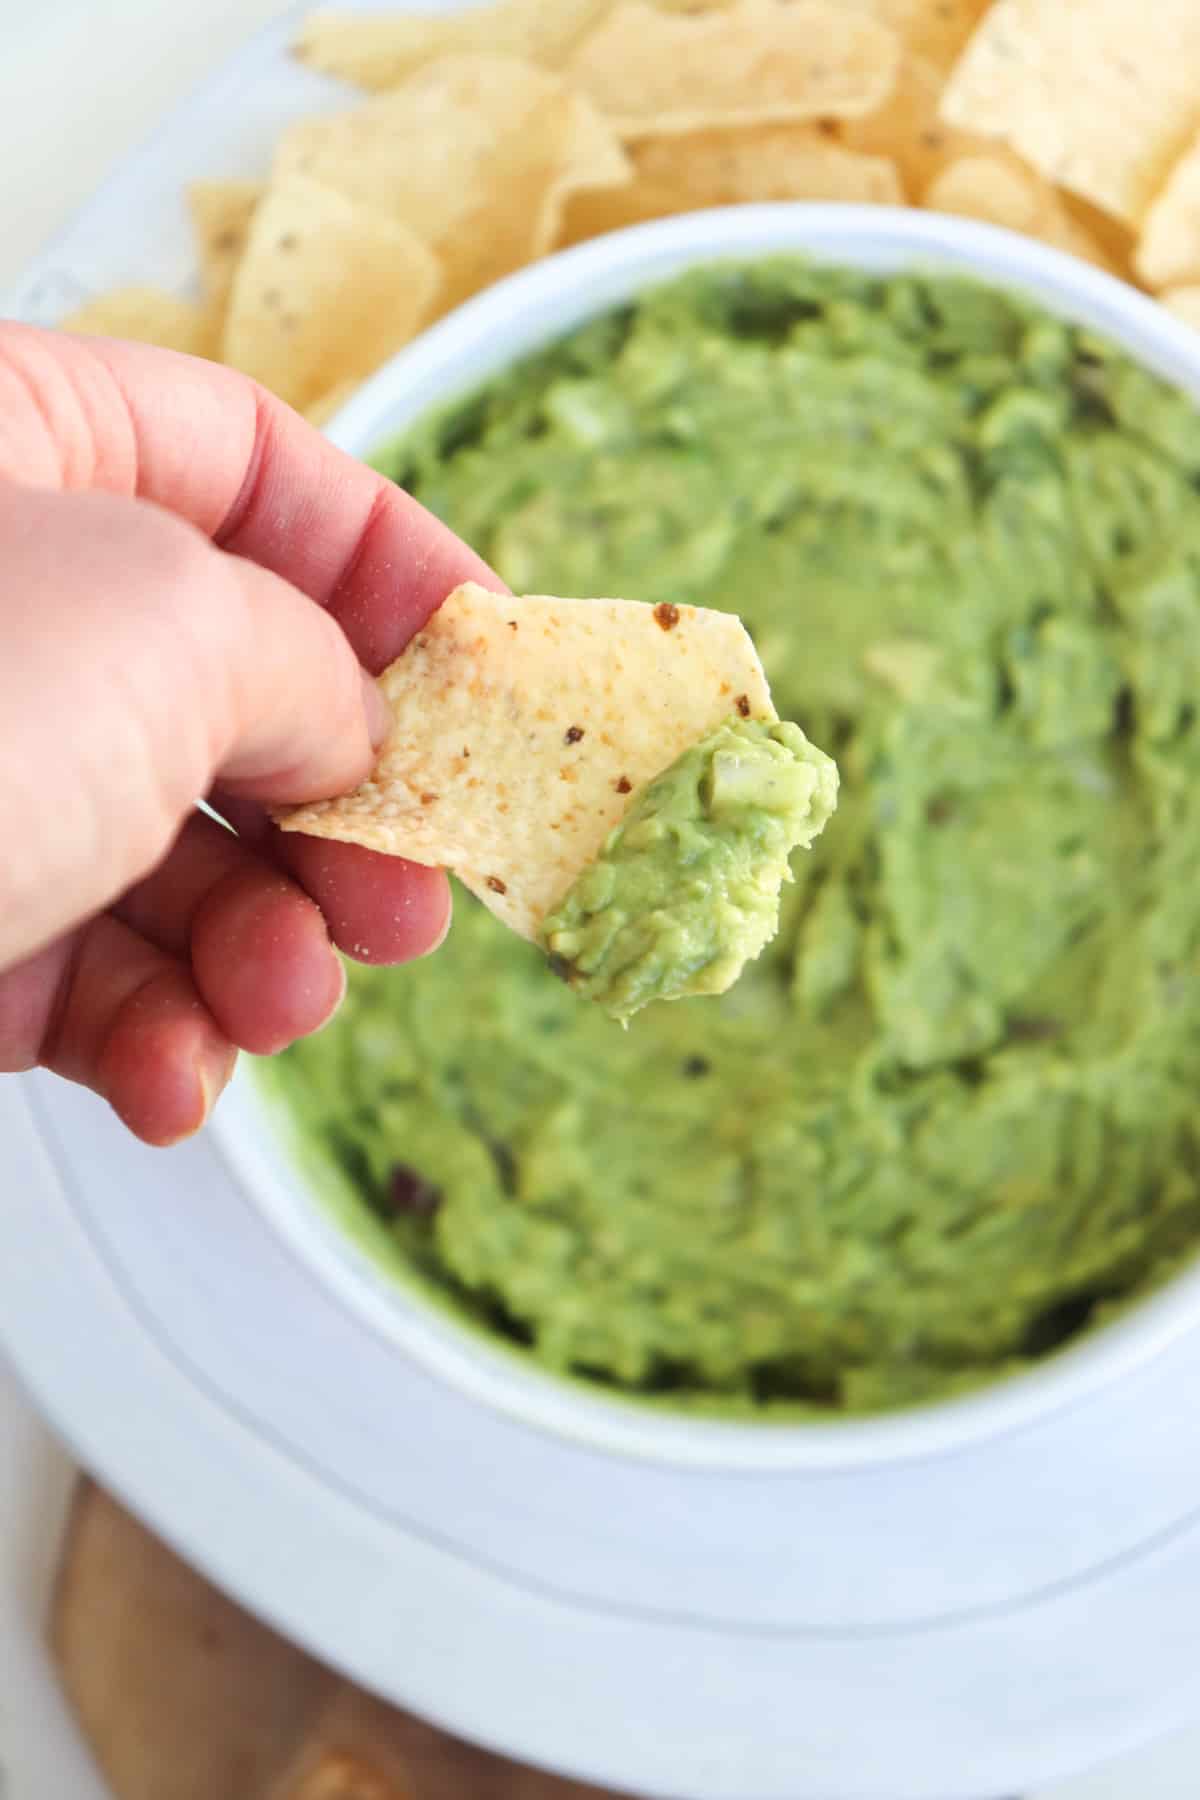 chip dipped in guacamole.